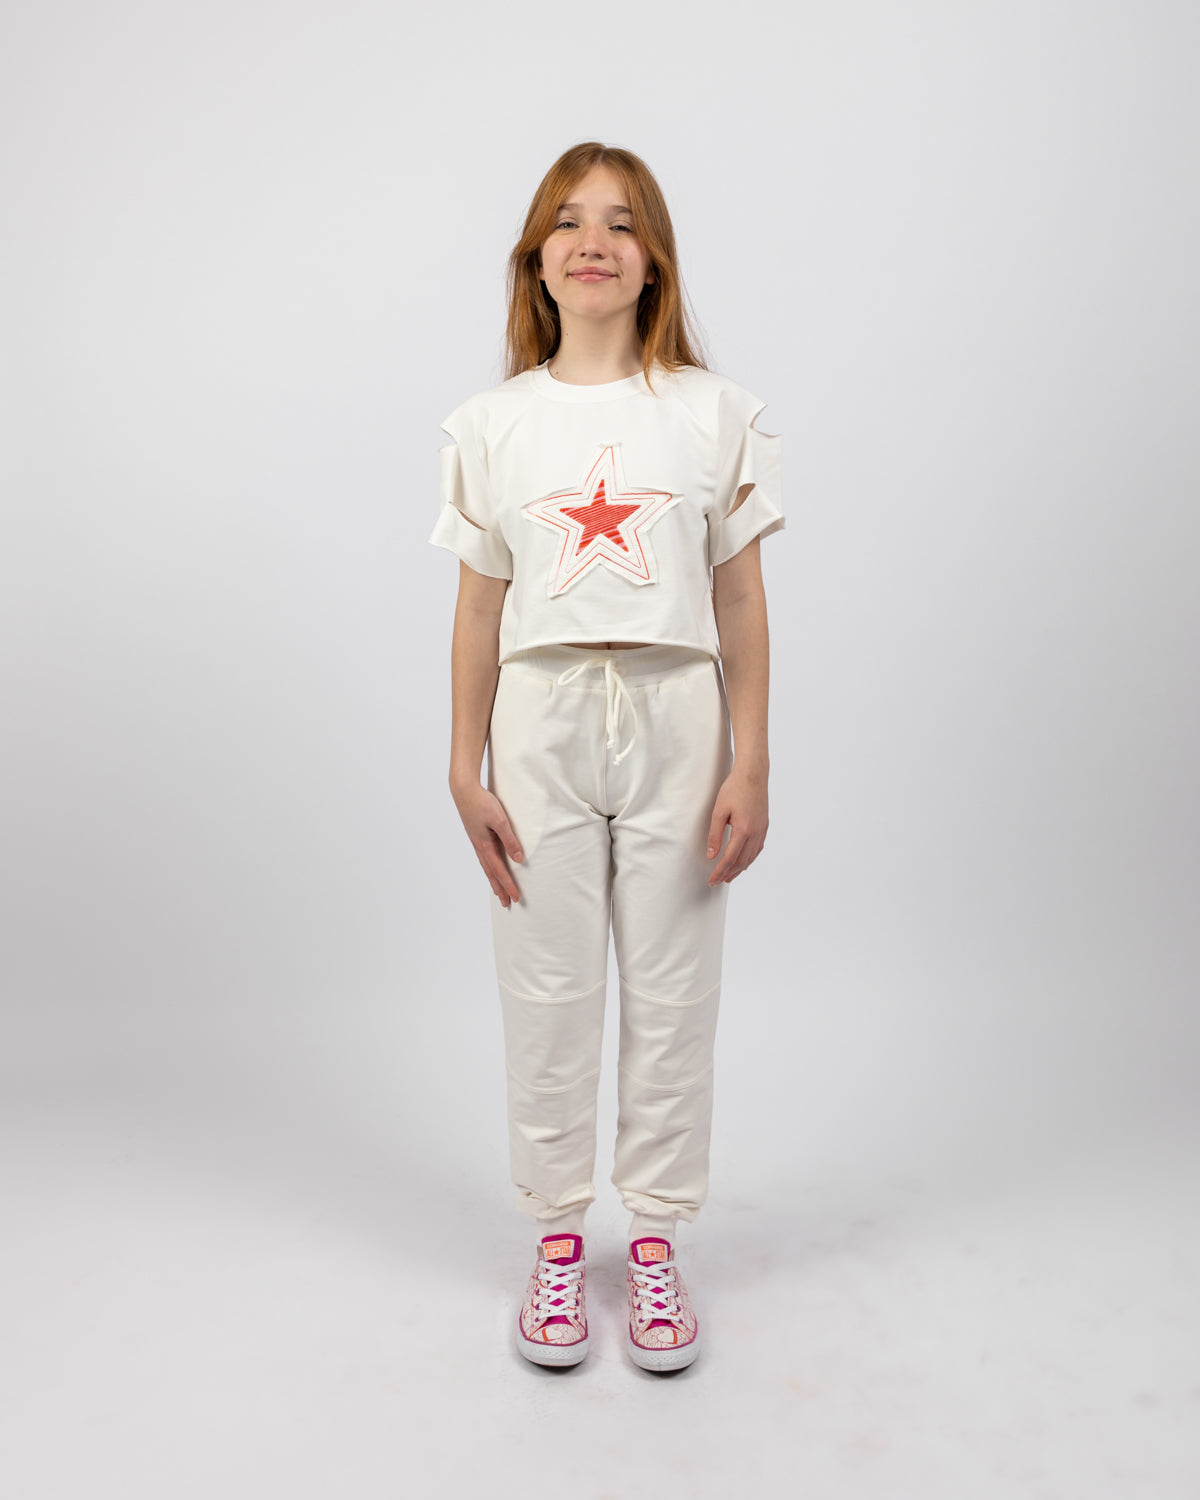 Star Embroidered Cropped Sweatshirt For Girls - White